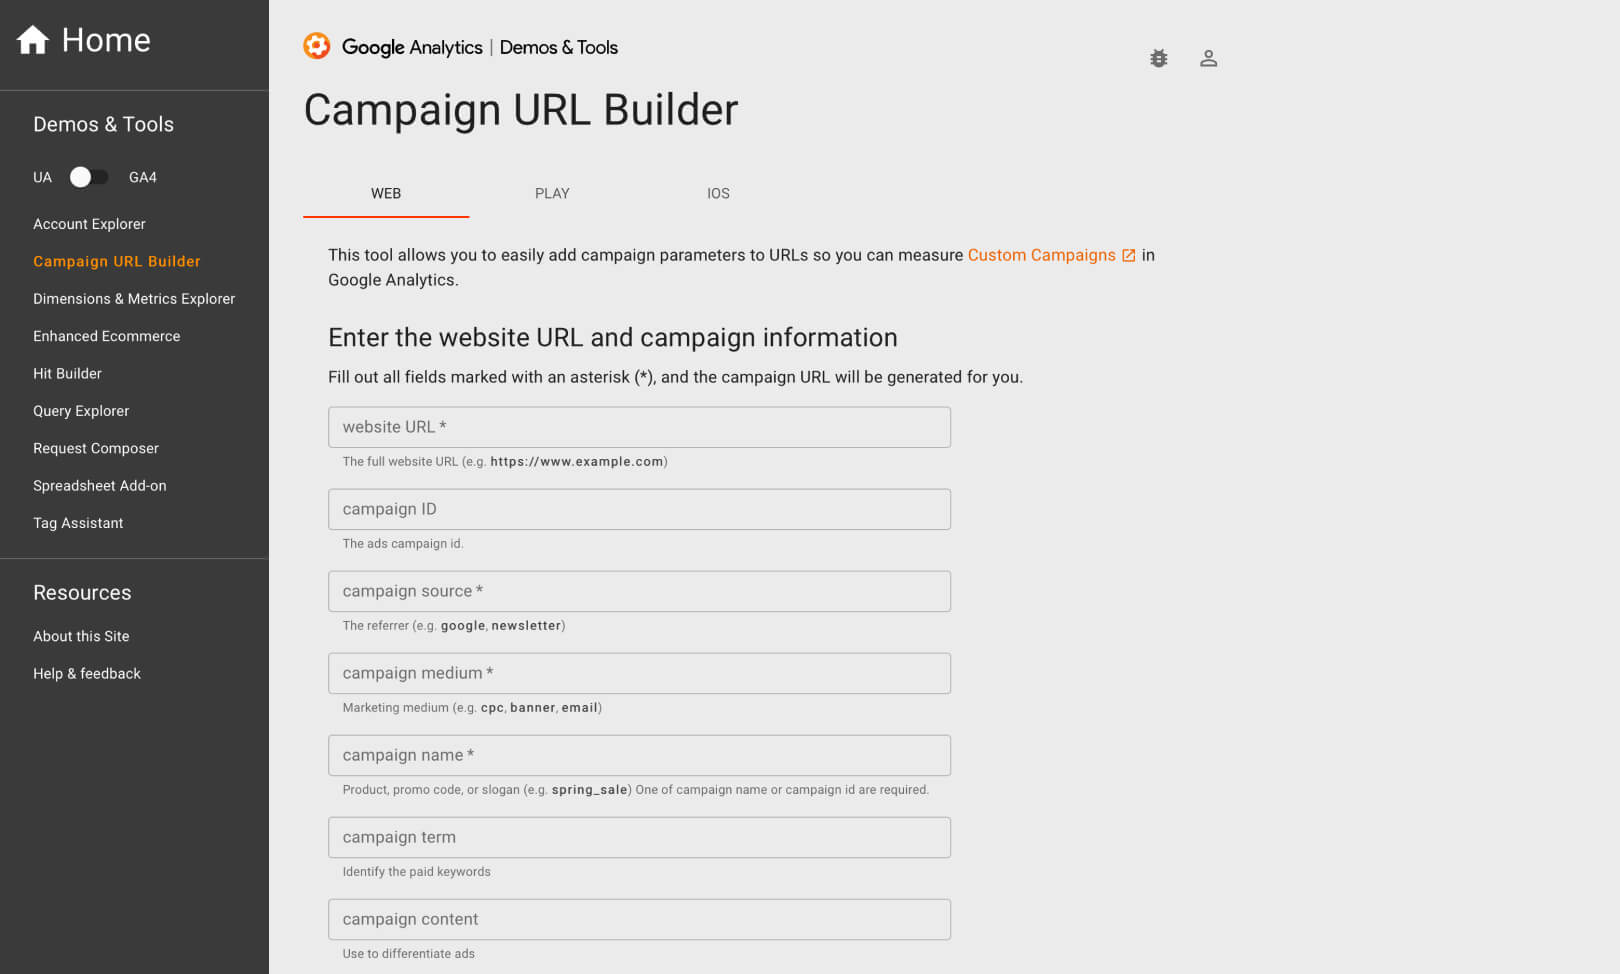 What Is the Campaign URL Builder and How Does It Work